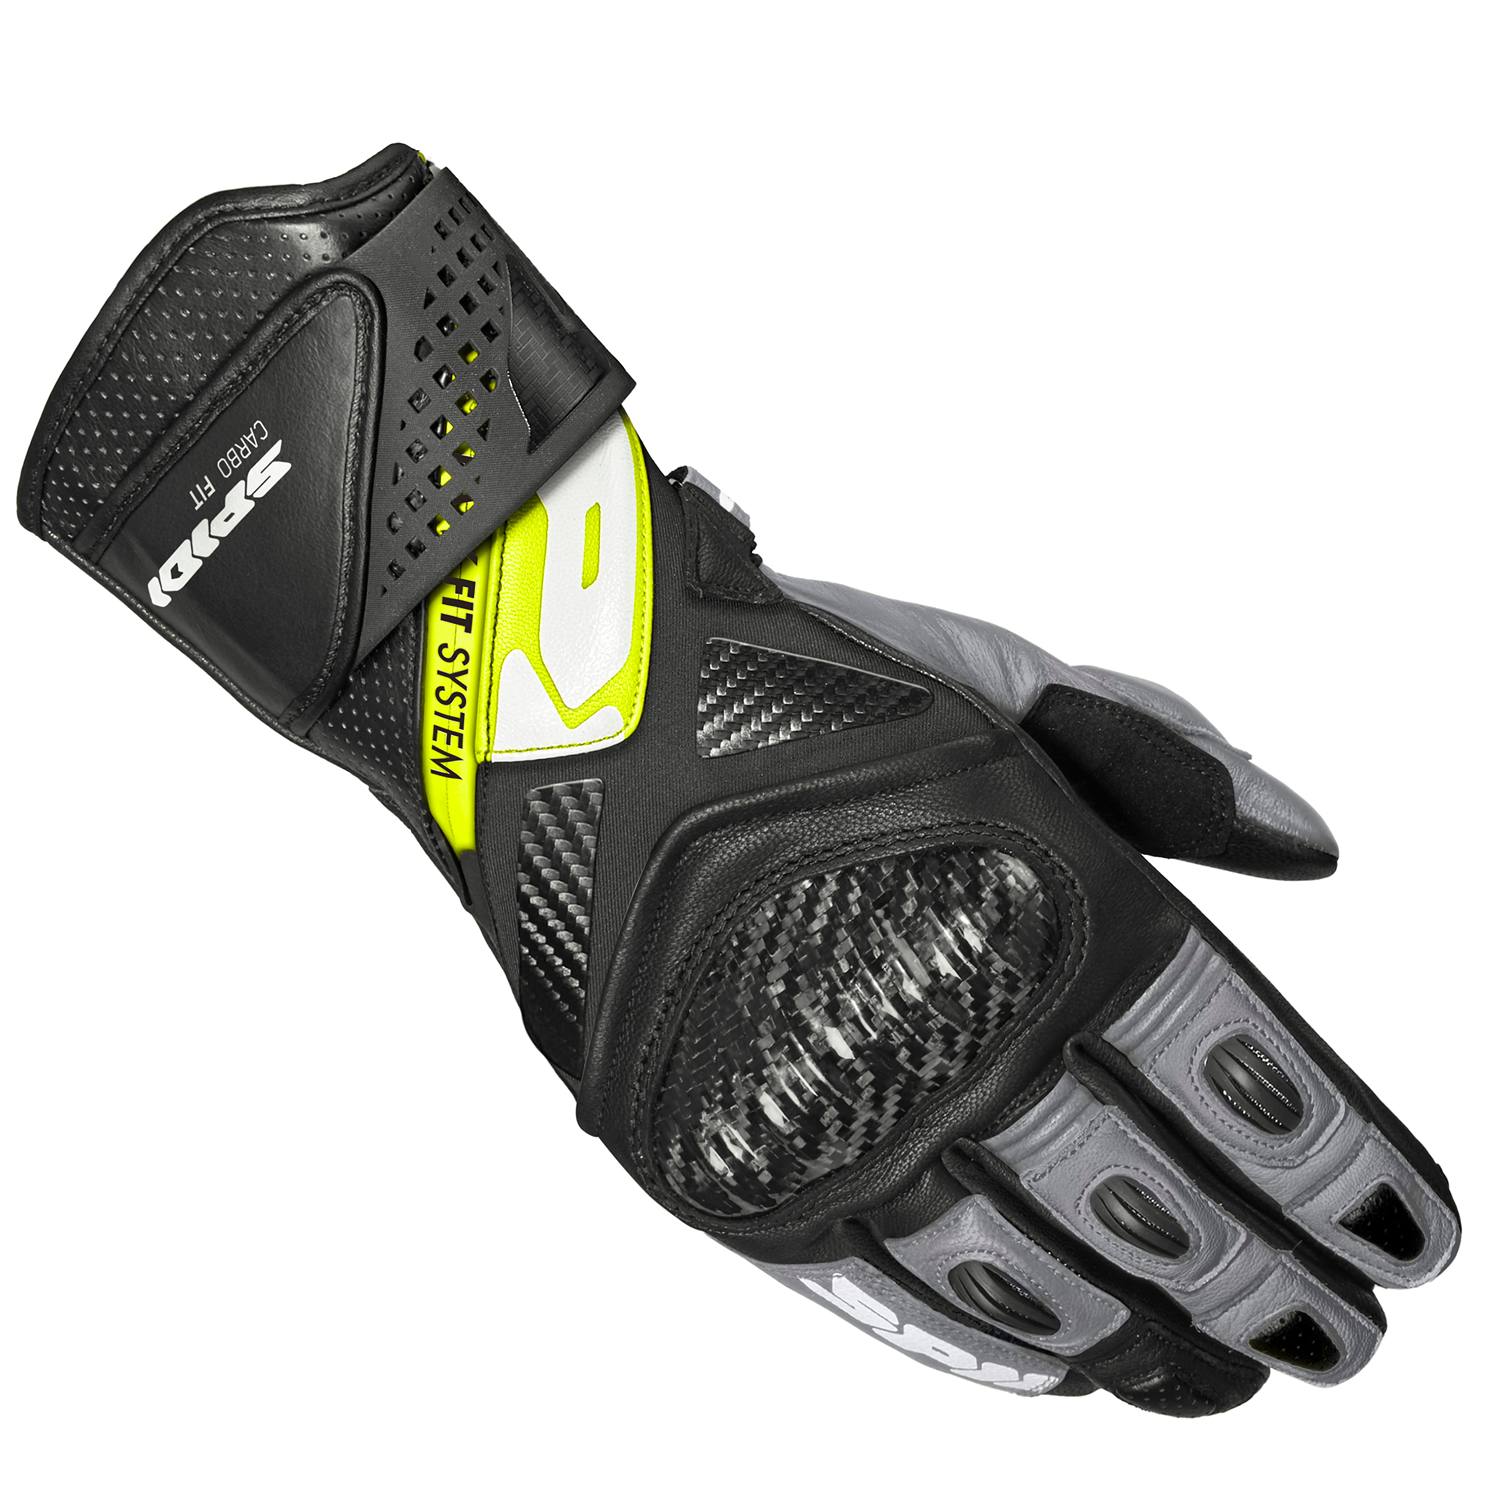 Image of EU Spidi Carbo Fit Gloves Black Fluorescente Yellow Taille 2XL